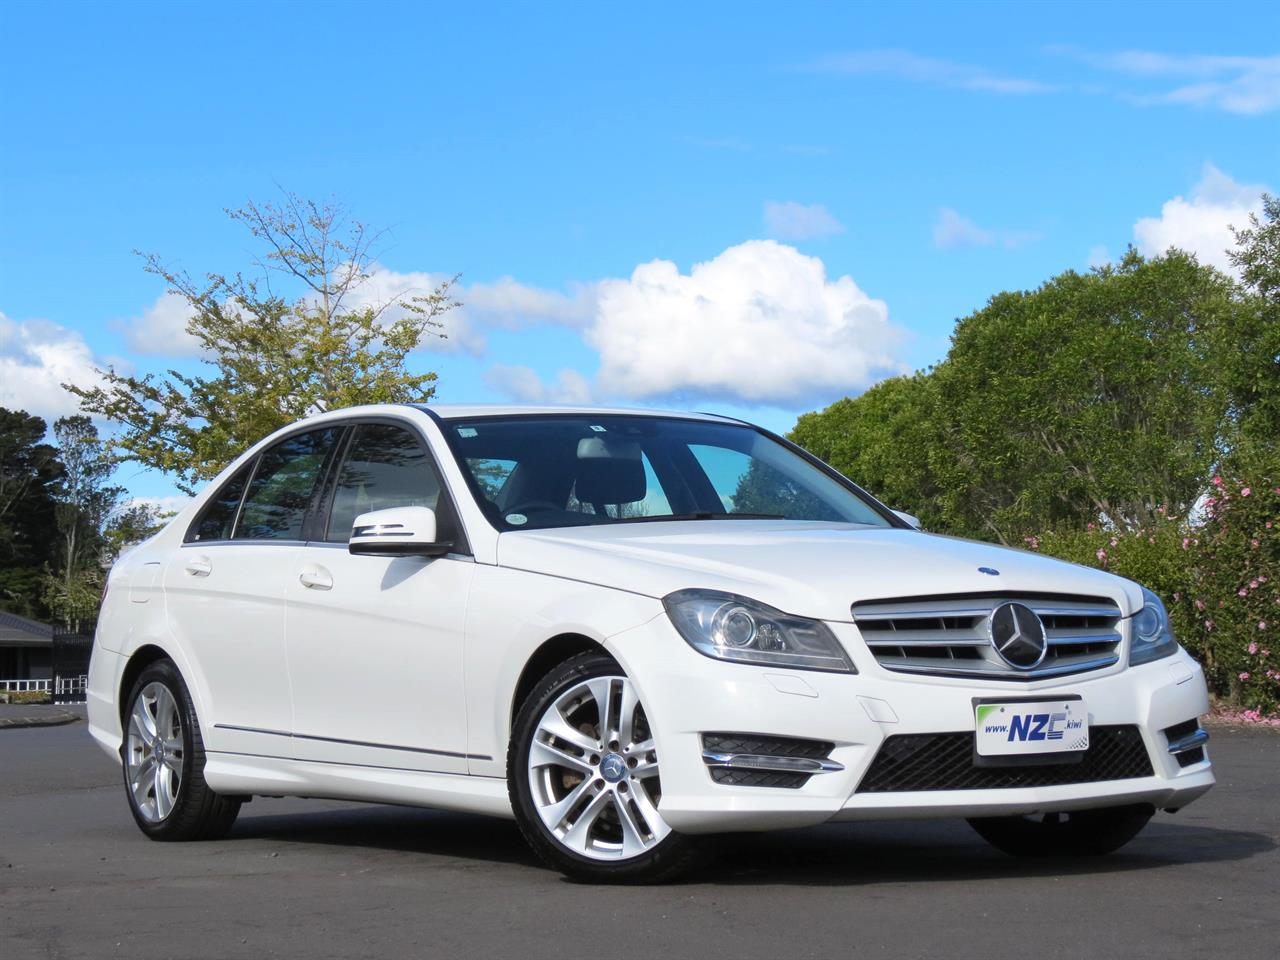 NZC 2013 Mercedes-Benz C 180 just arrived to Auckland